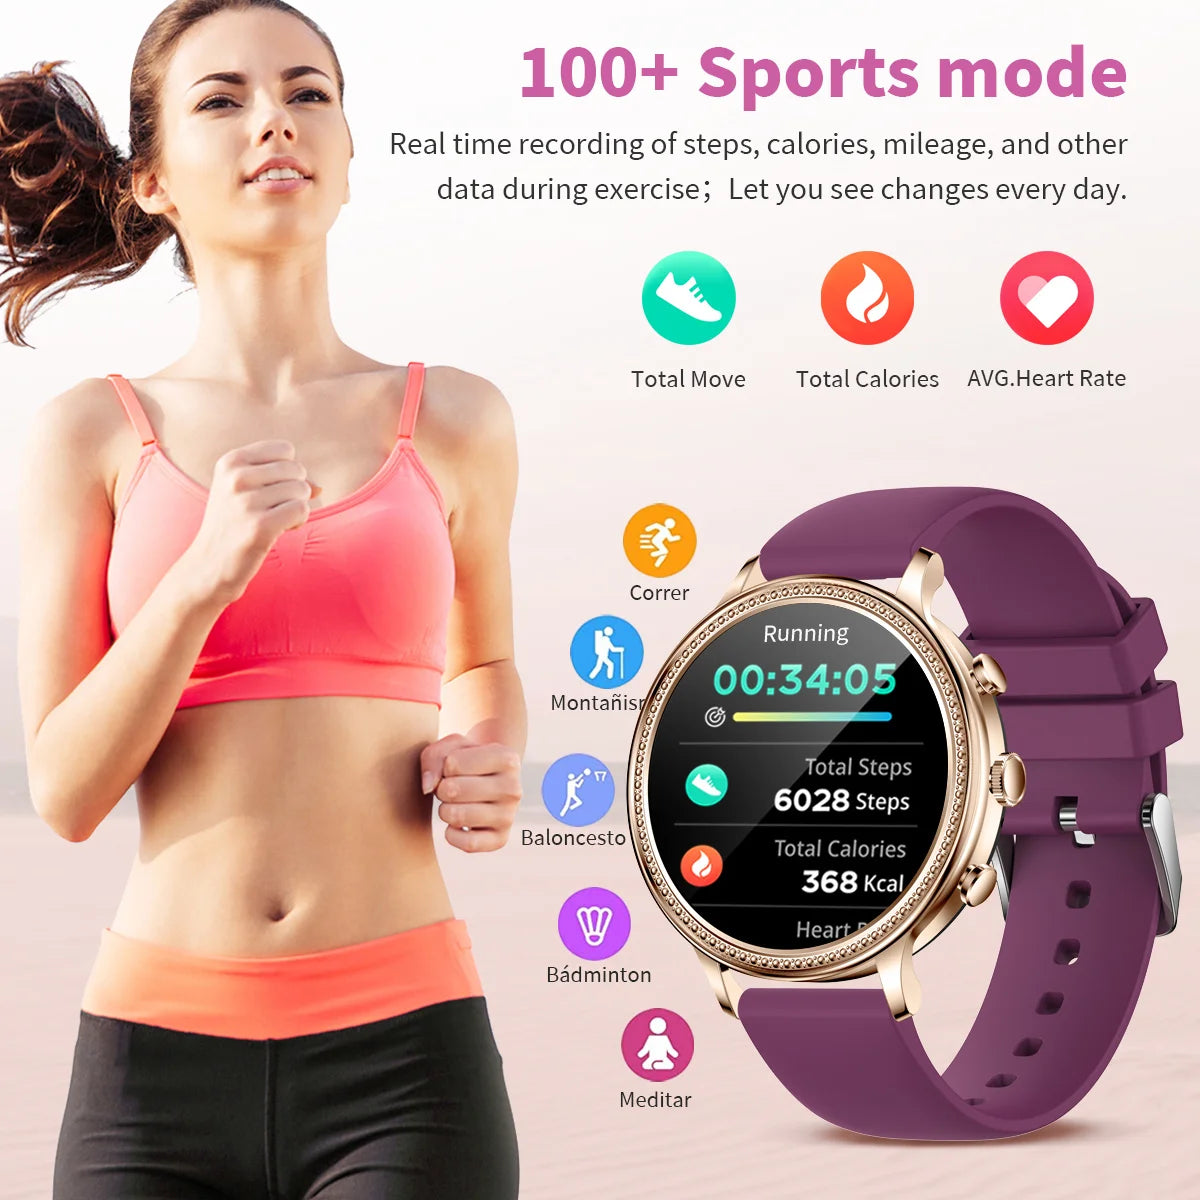 LIGE Luxury Smart Watches For Women Bluetooth Call Connected Phone Women Watch Health Monitor Sports Smartwatch